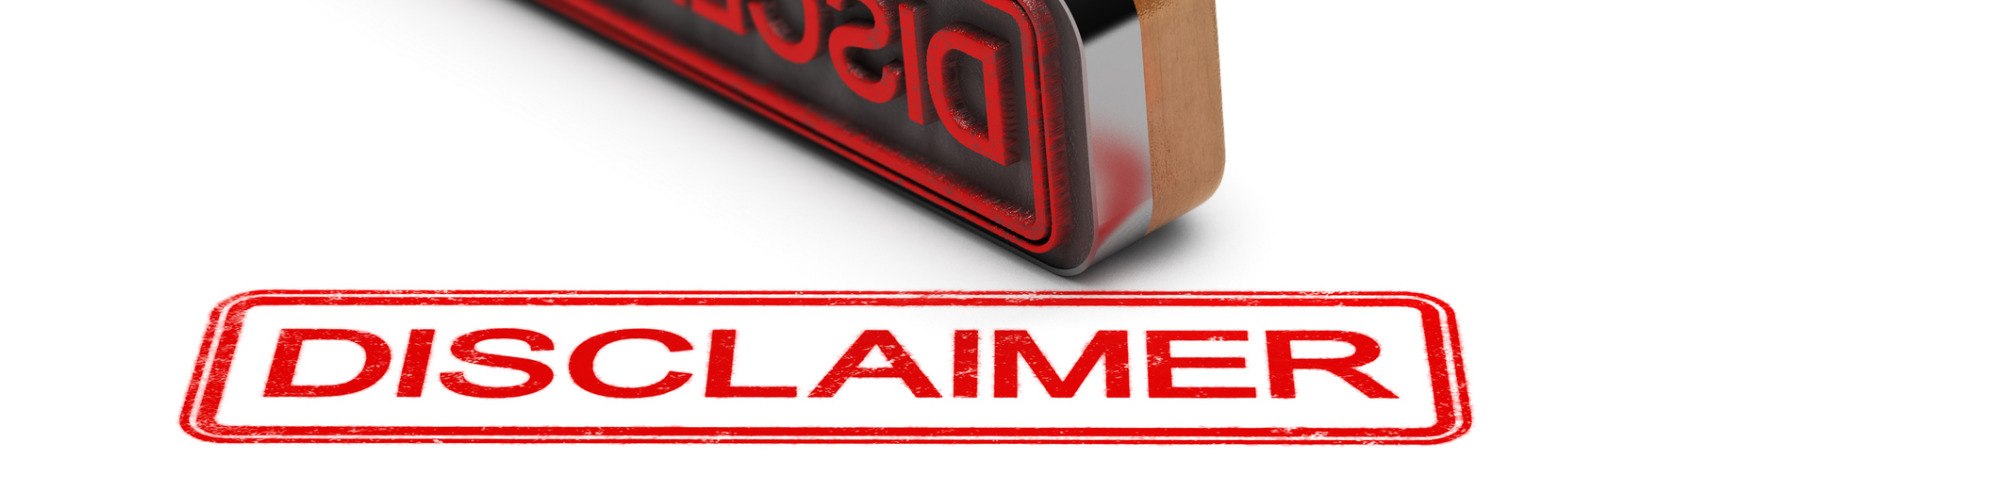 Solicitor Disclaimers - A Guide for Family Lawyers 